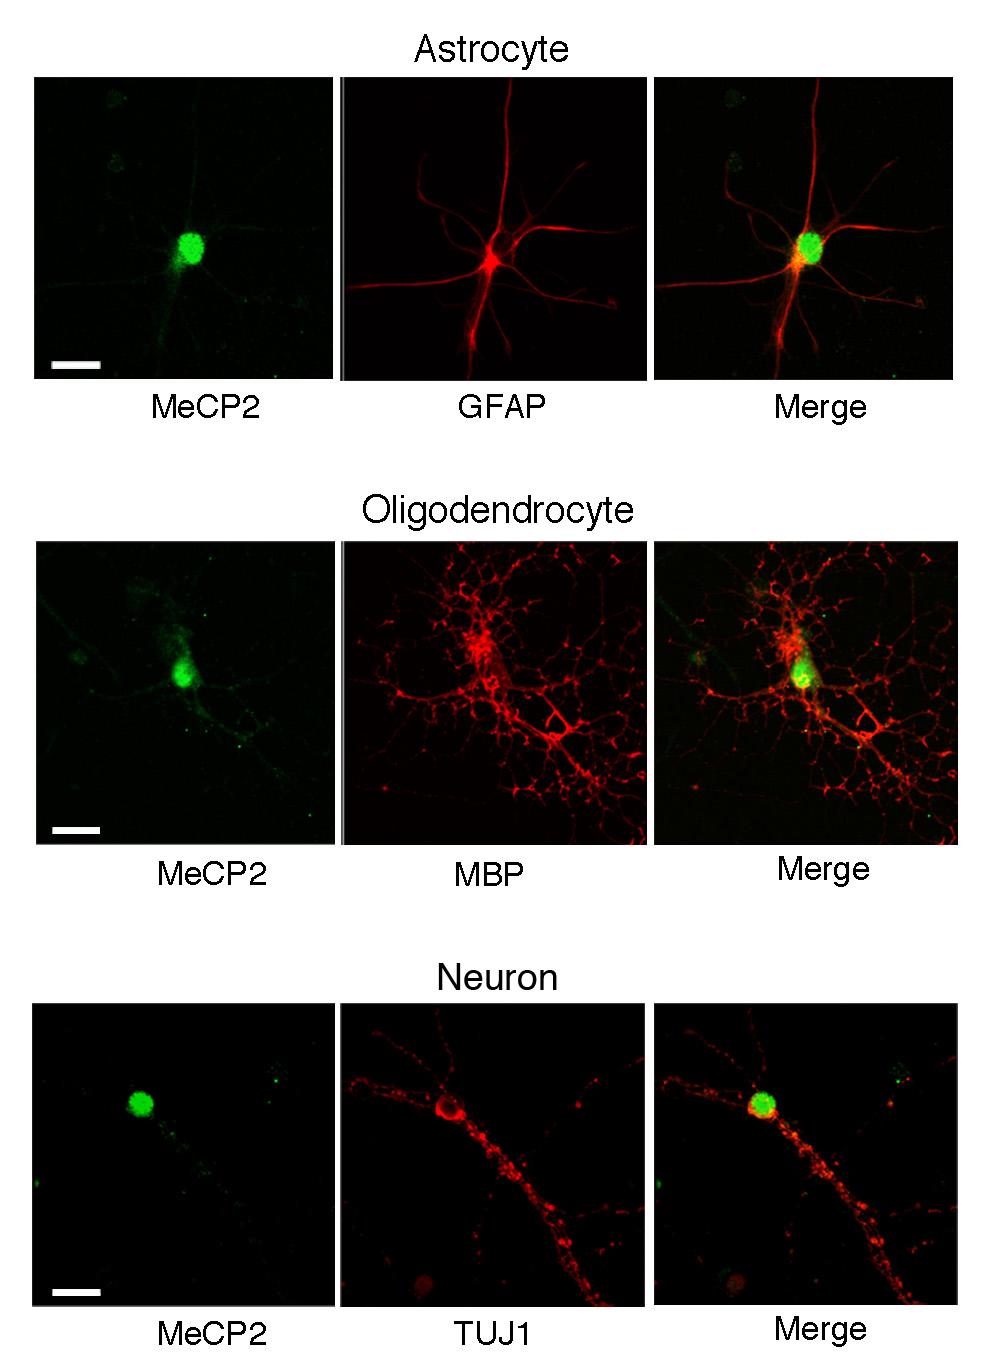 Supplementary Figure S2. MeCP2 protein is present in nuclei of glia in primary cerebellar cultures.